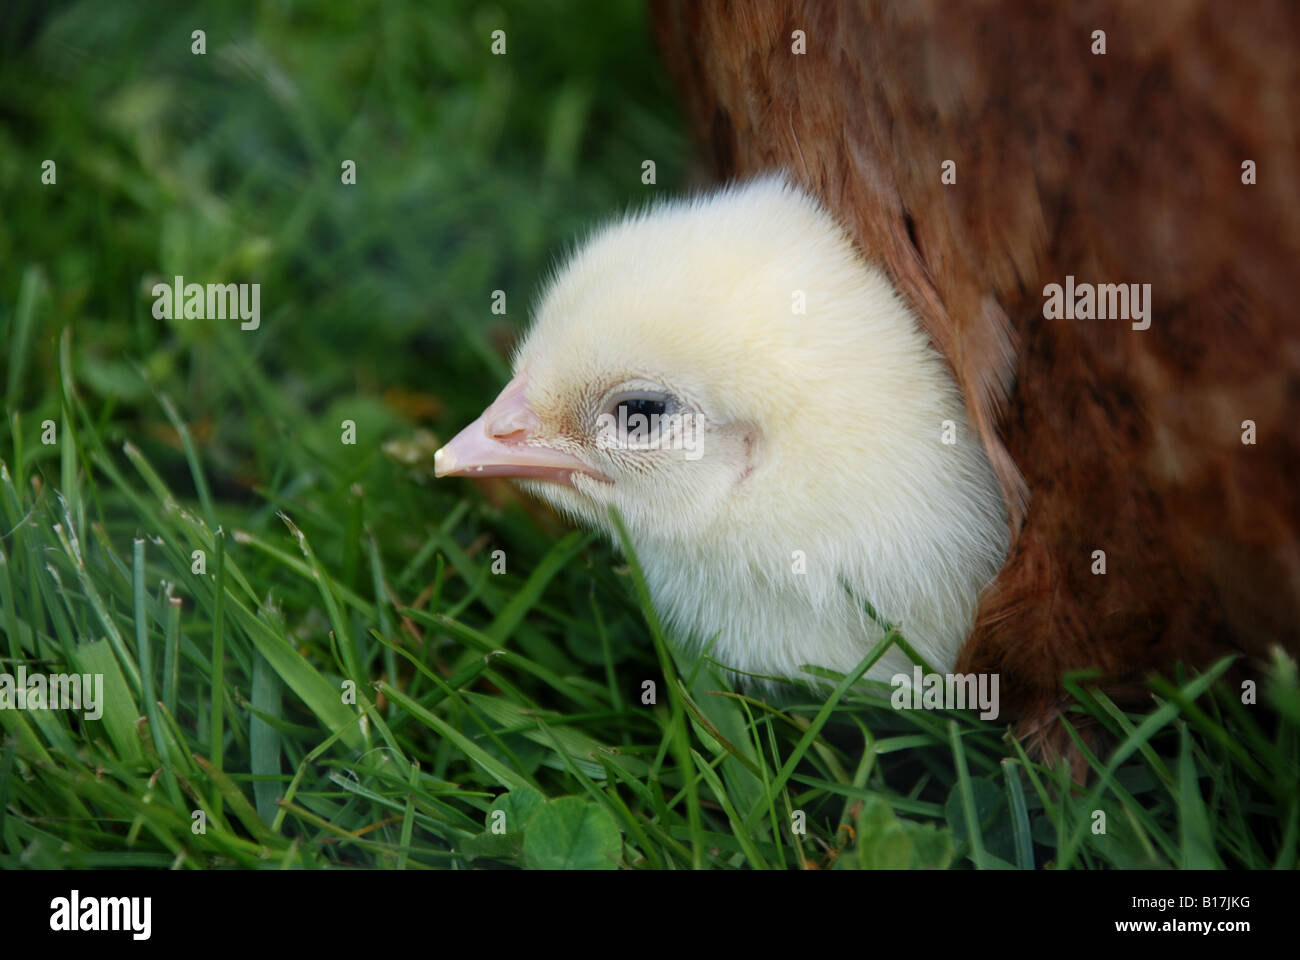 Chicken looking out from her mothers feathers Stock Photo